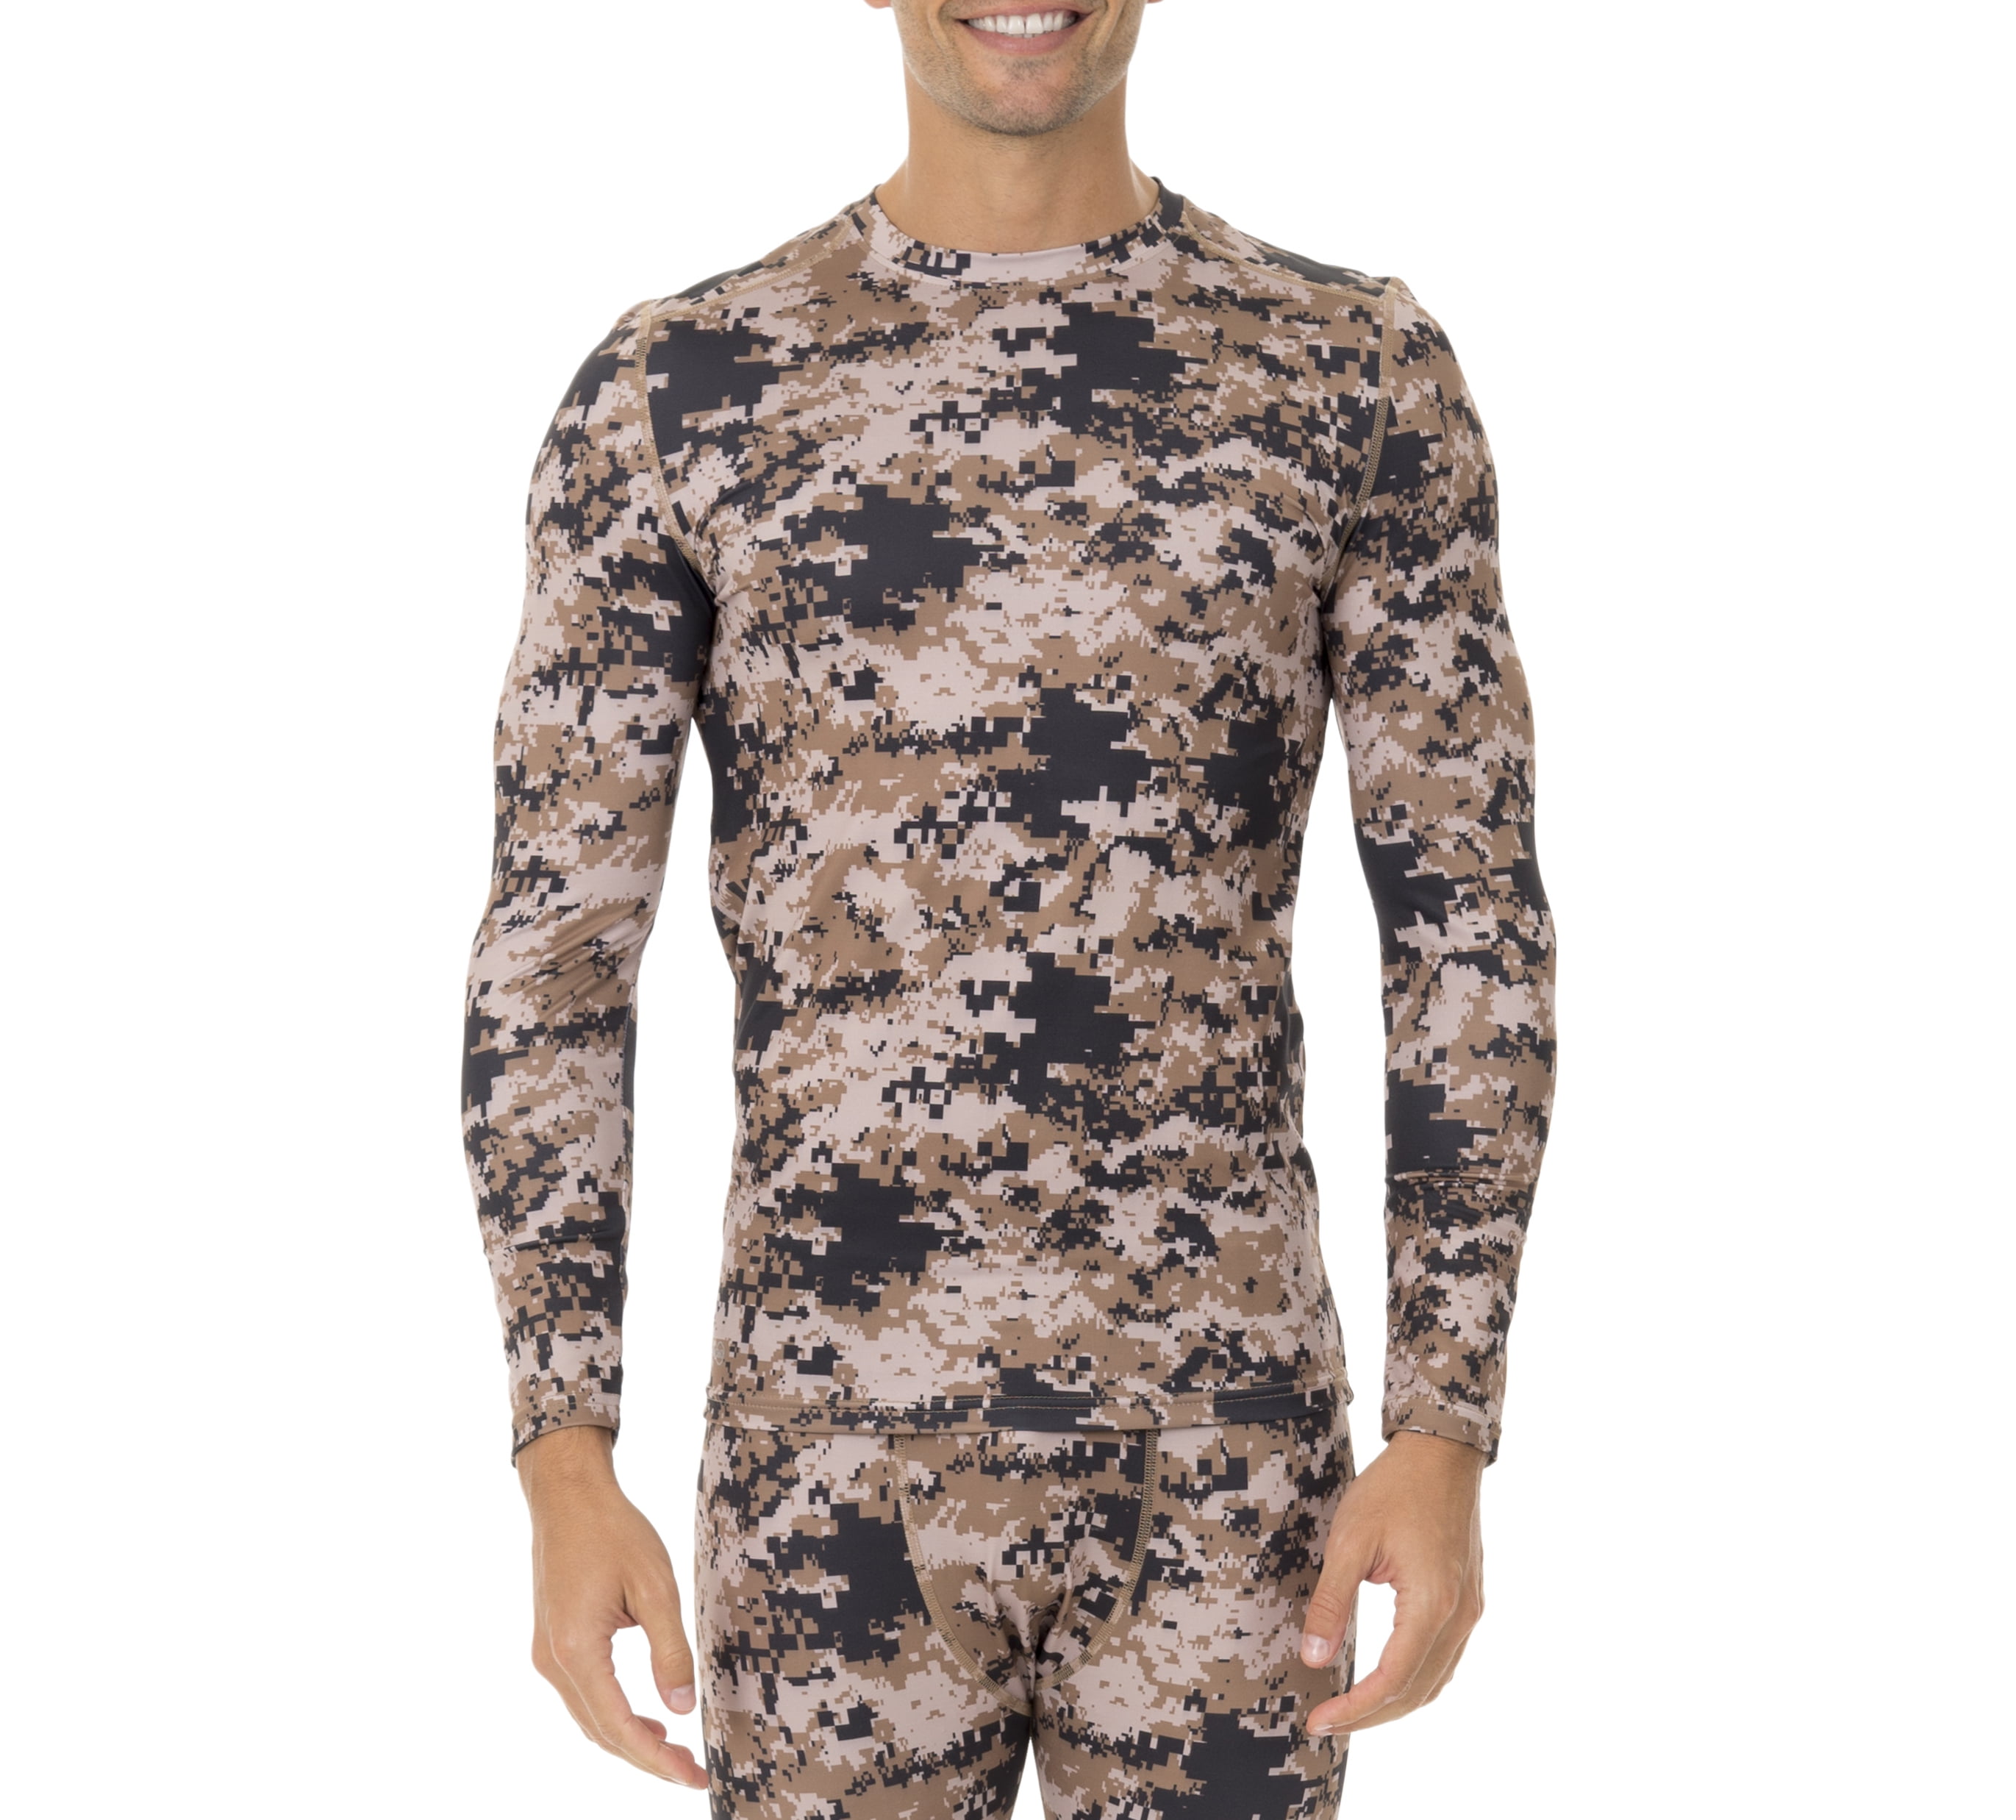 Russell Men's Voltage Performance Baselayer Thermal Top - Walmart.com